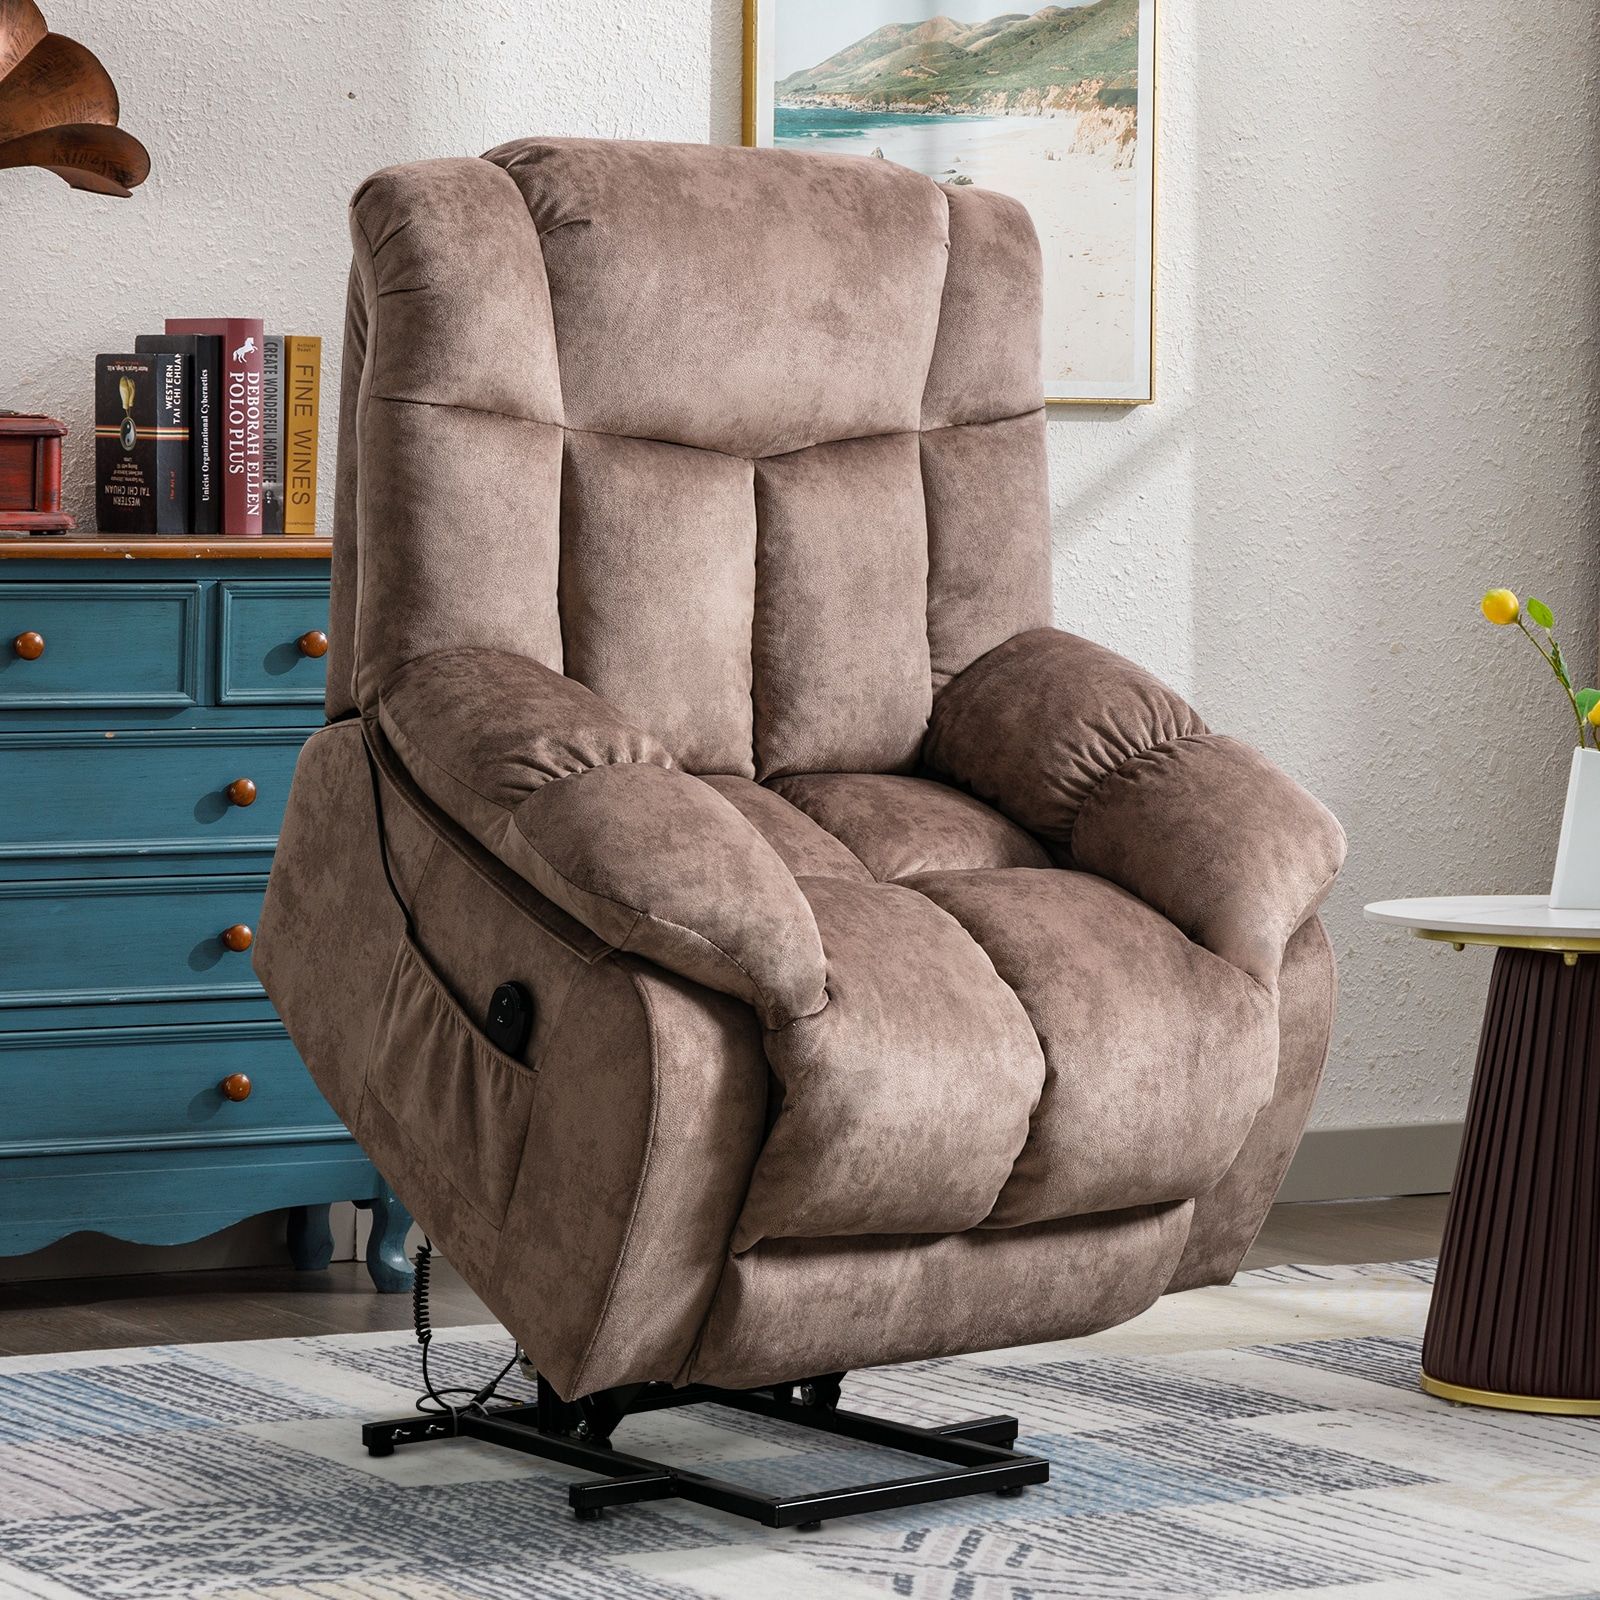 Canmov Power Lift Recliner Camel Velvet Powered Reclining Recliner With  Lift Assistance In The Recliners Department At Lowes Throughout Modern Velvet Sofa Recliners With Storage (View 11 of 15)